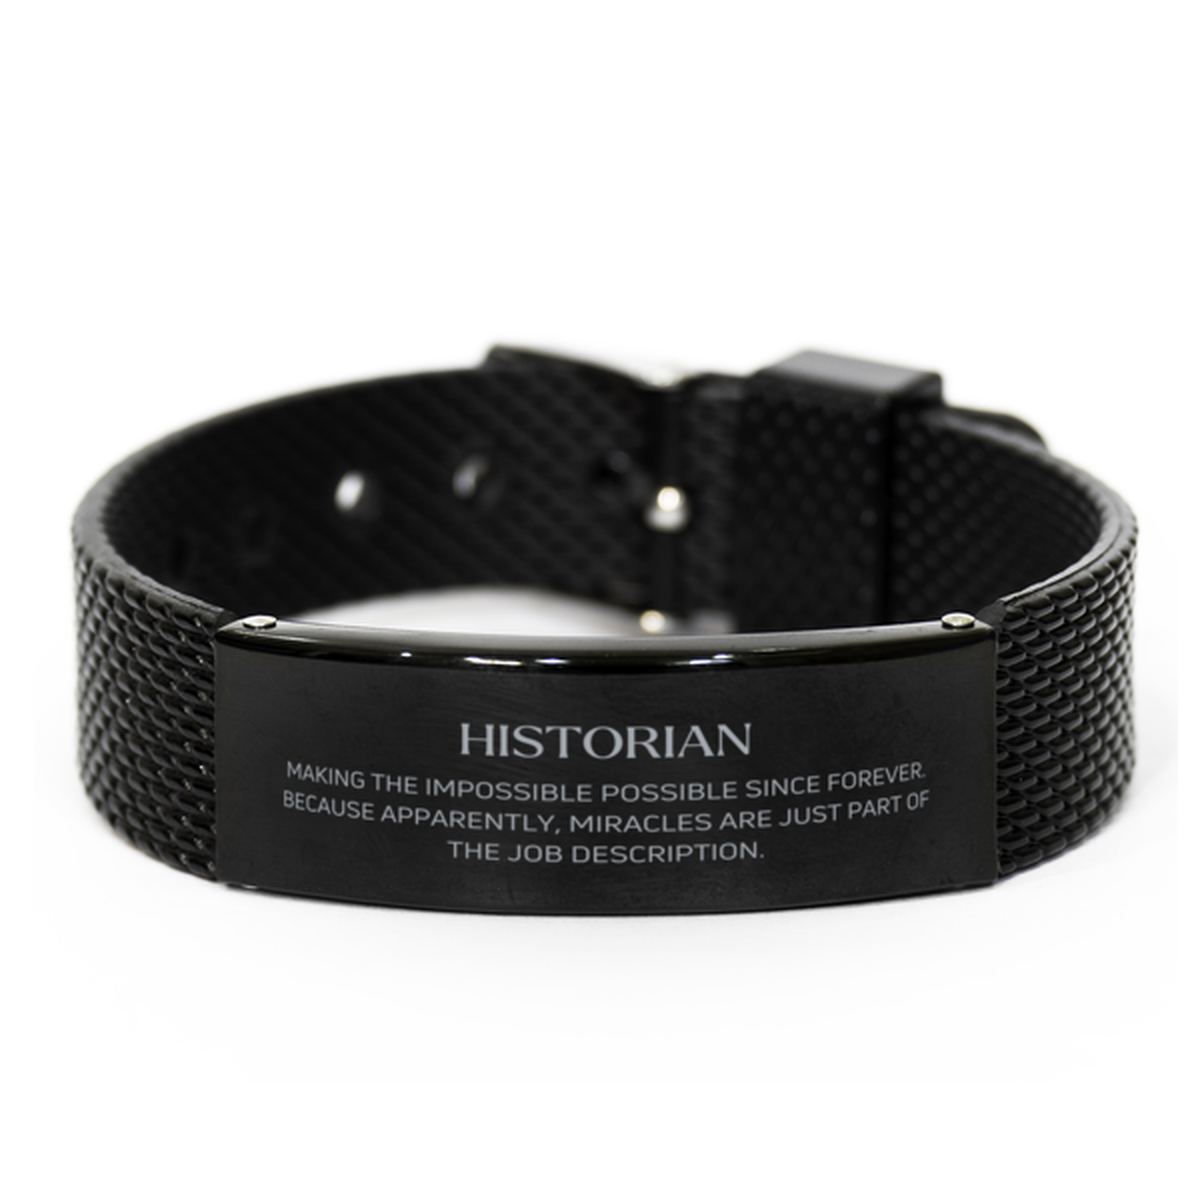 Funny Historian Gifts, Miracles are just part of the job description, Inspirational Birthday Black Shark Mesh Bracelet For Historian, Men, Women, Coworkers, Friends, Boss